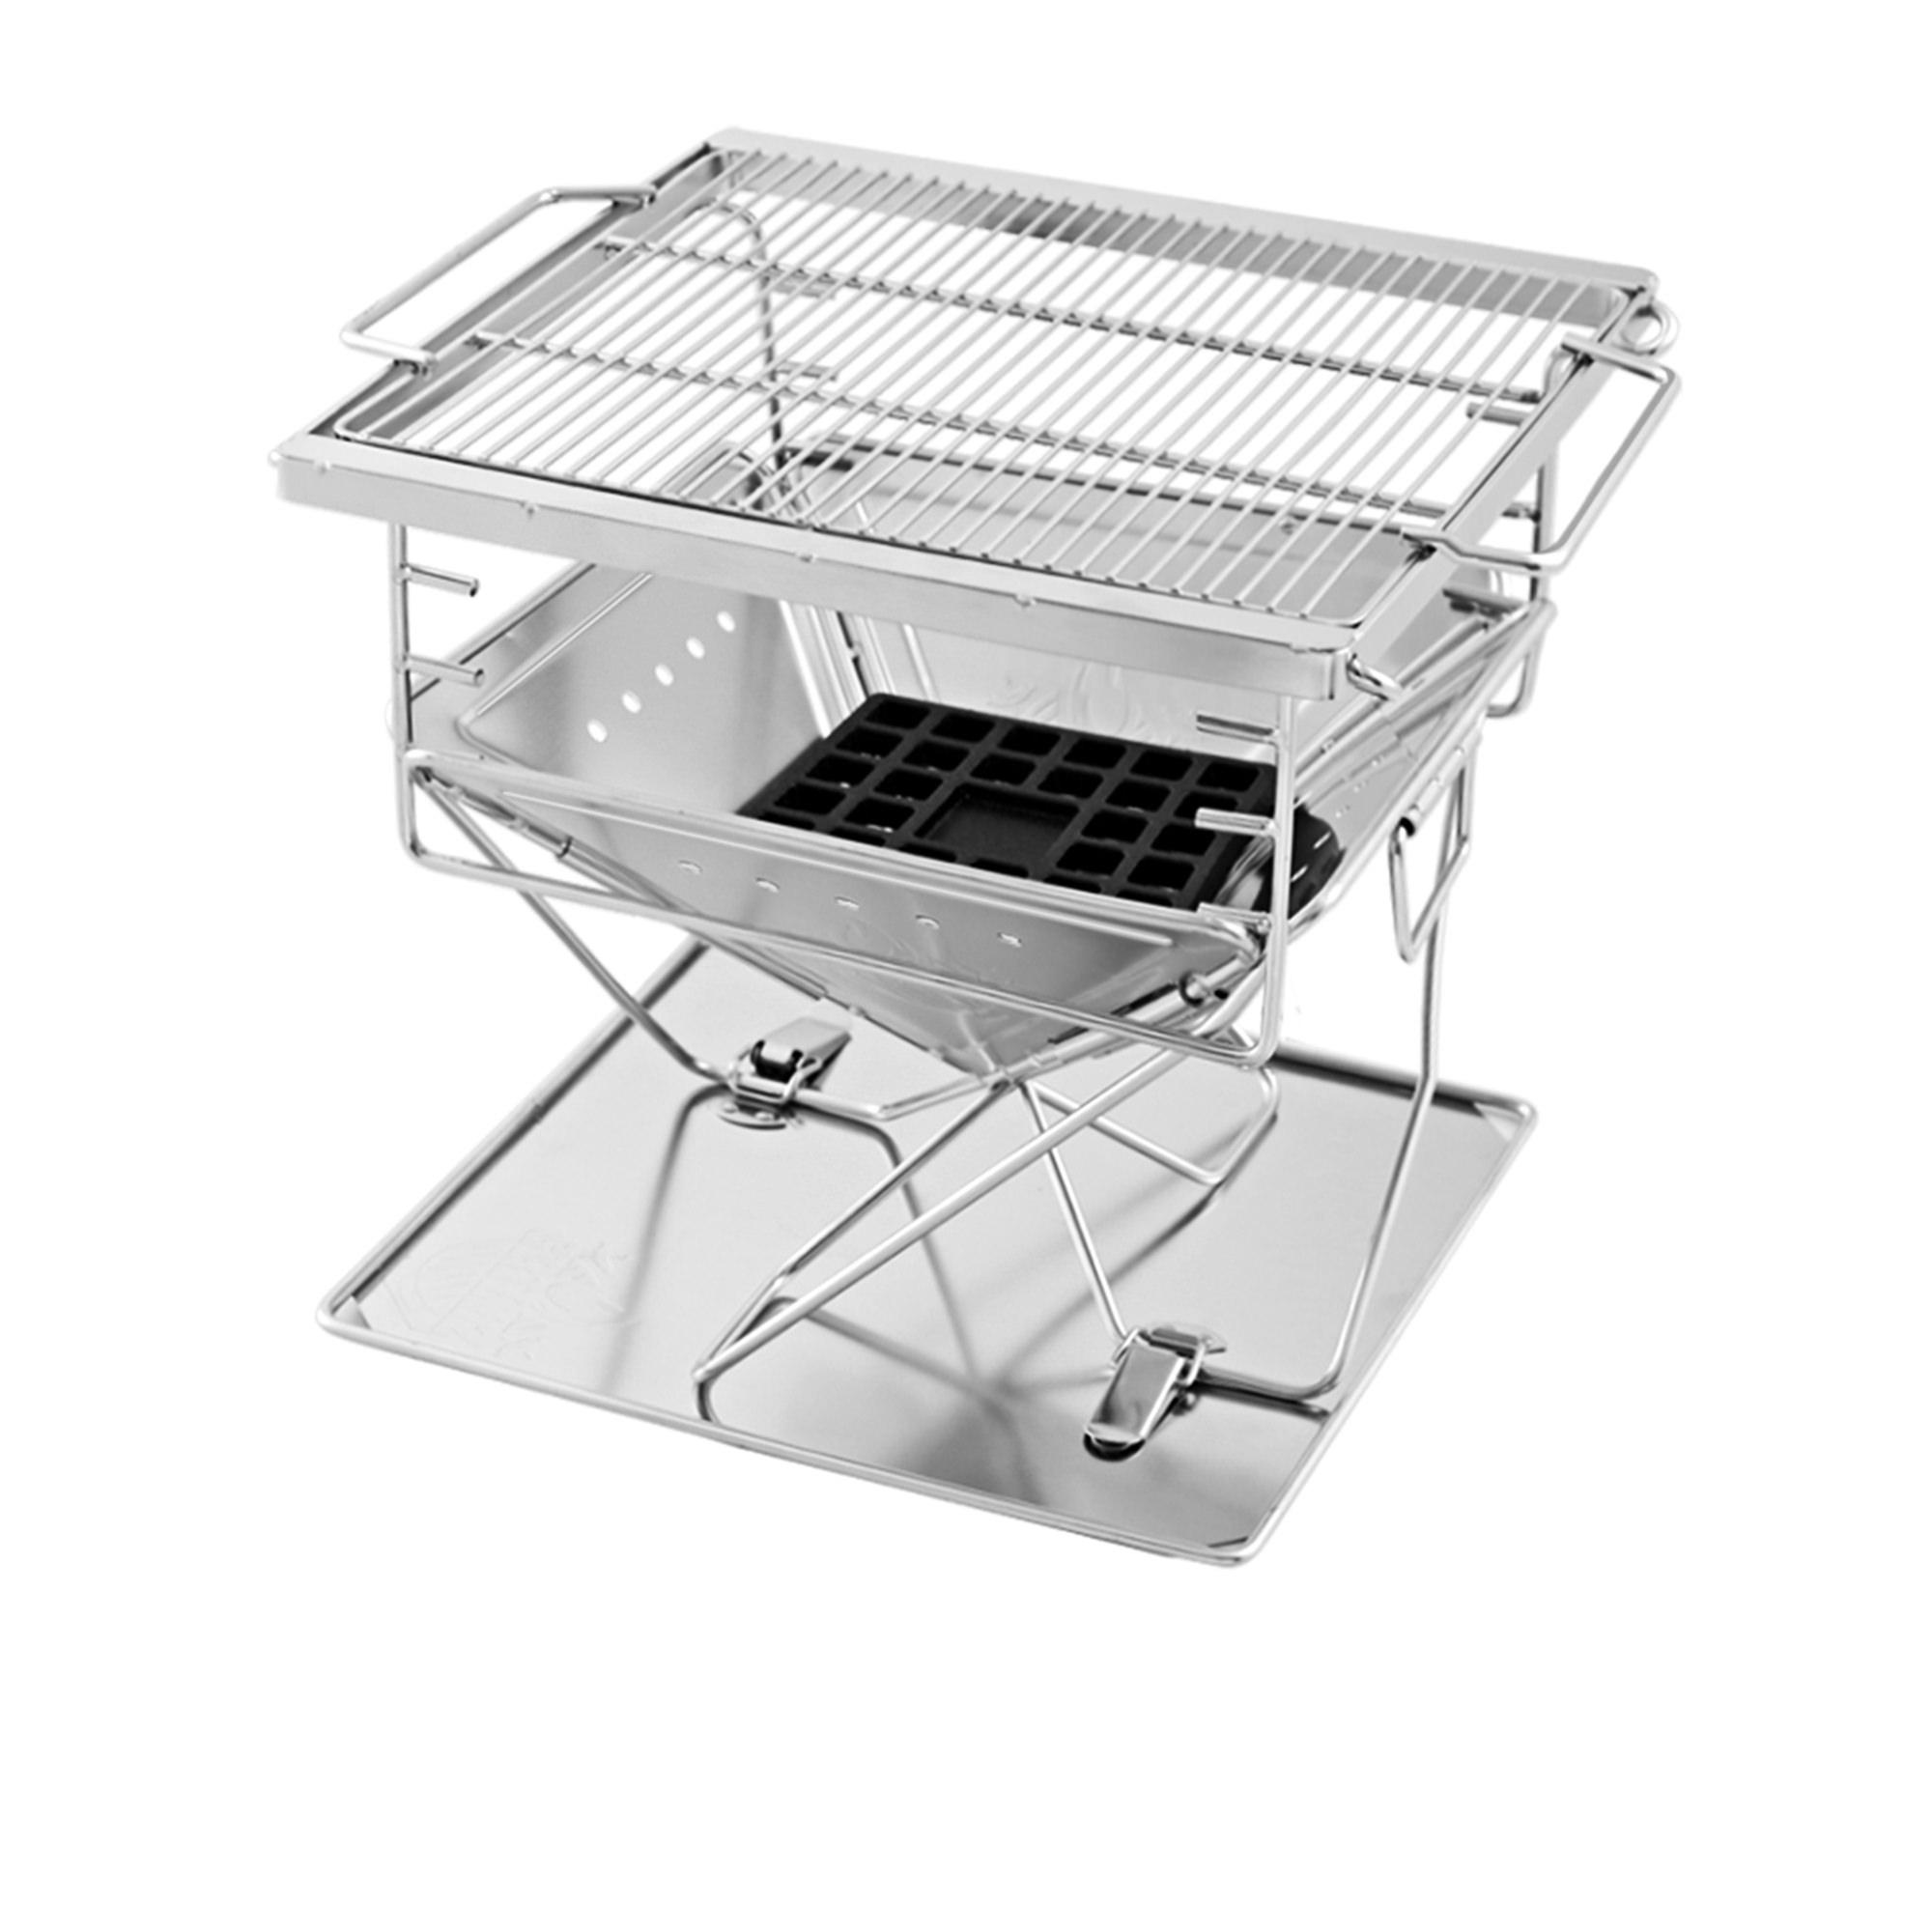 Grillz Stainless Steel Portable Fire Pit and BBQ with Carry Bag Image 1